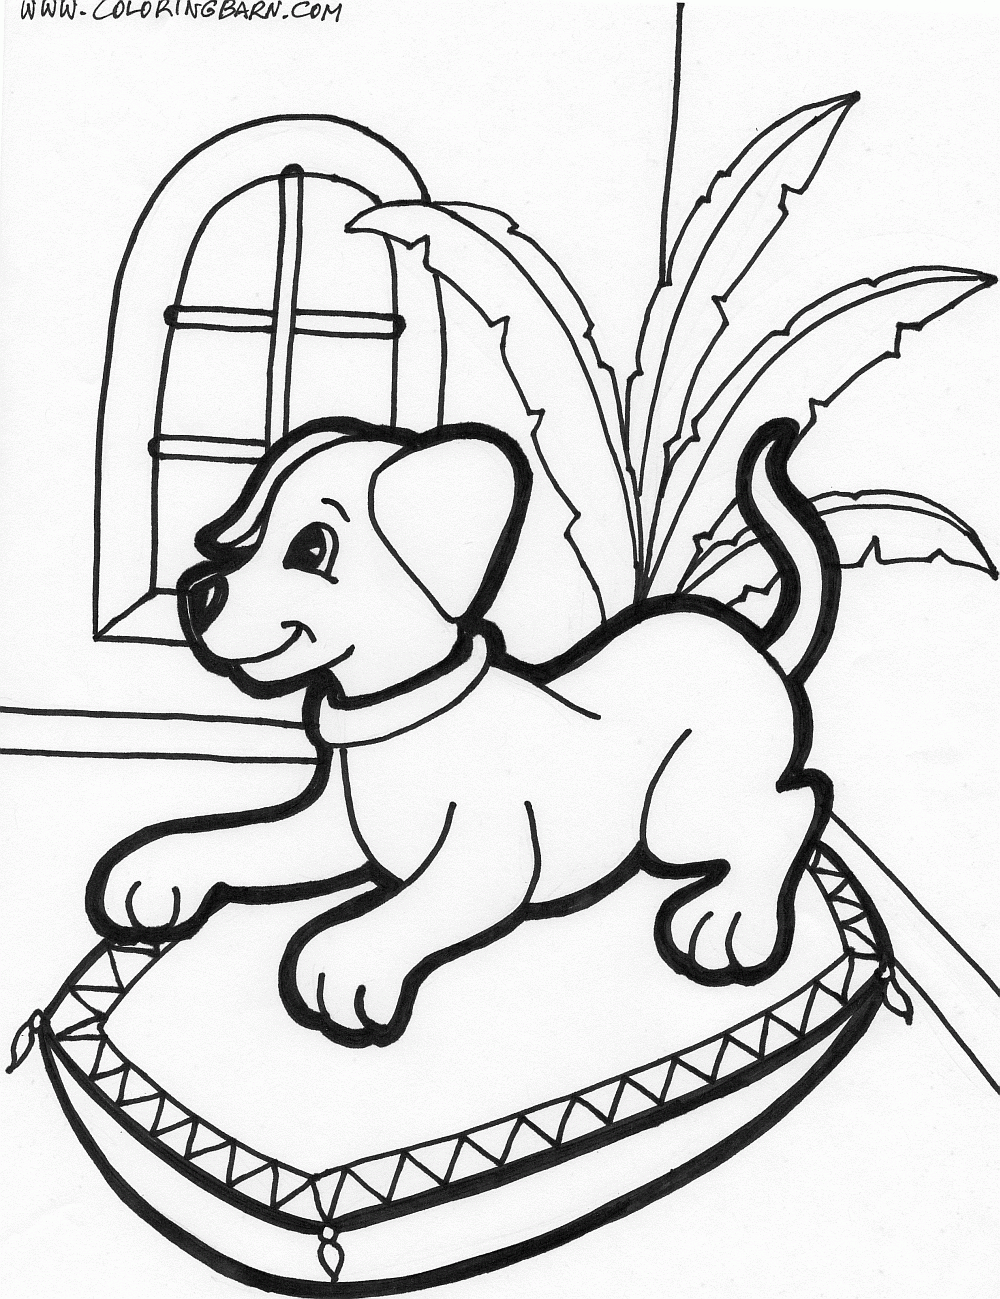 Pitbull Puppy coloring #6, Download drawings